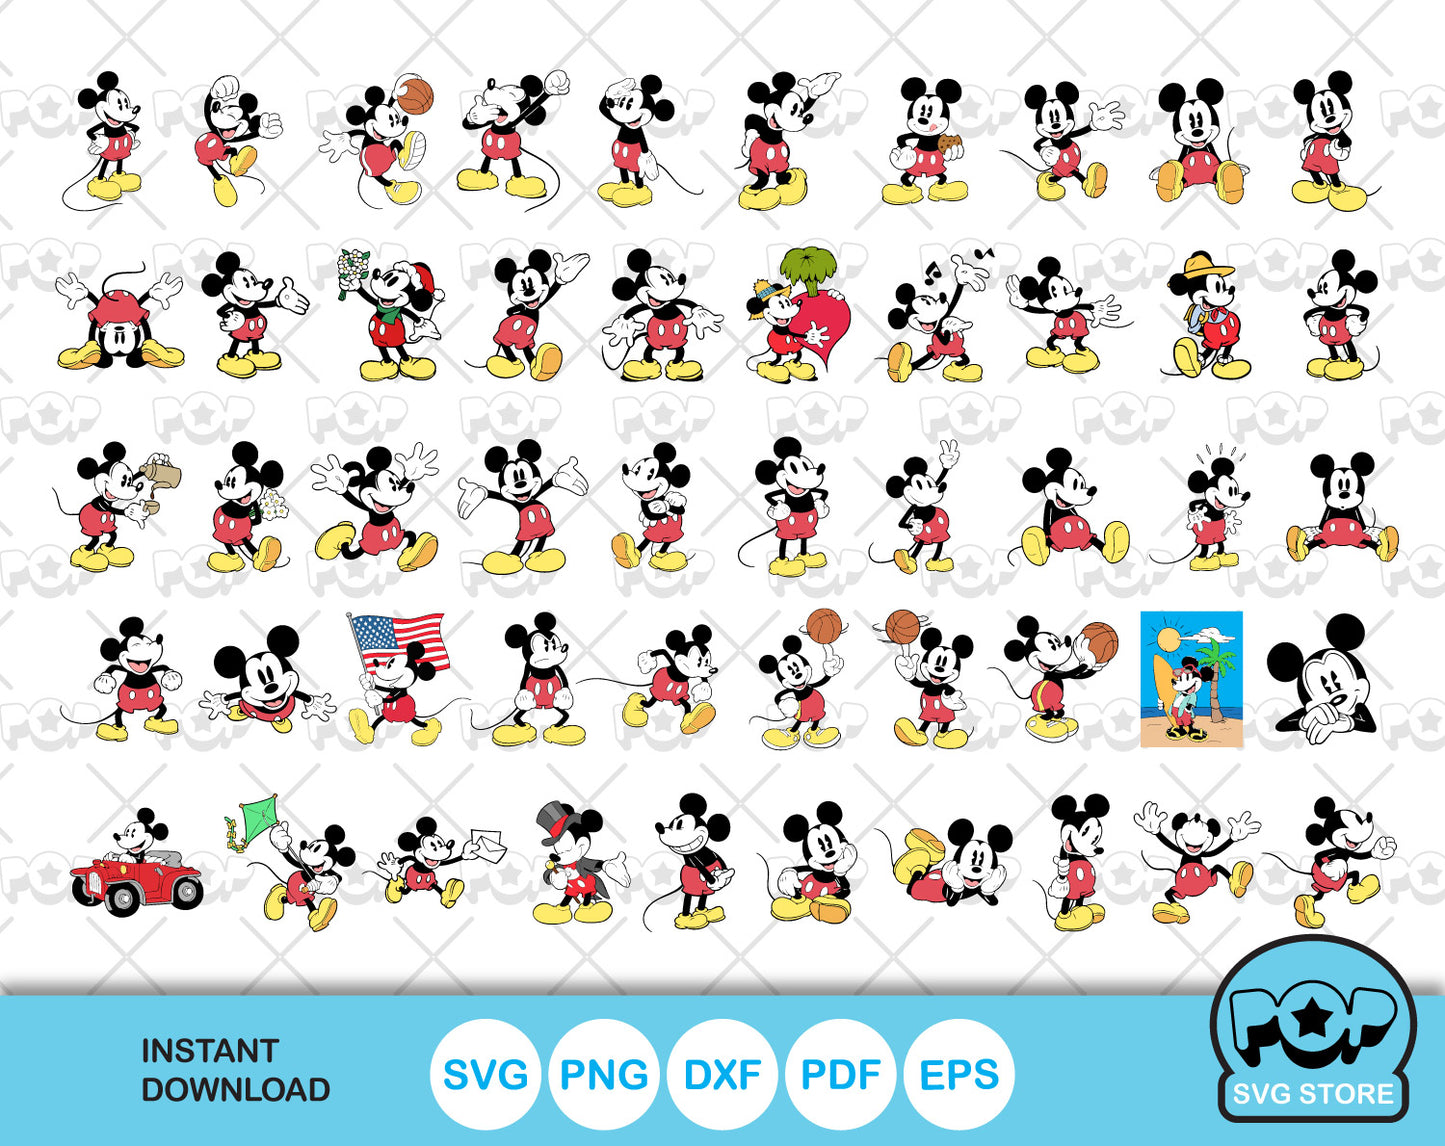 Classic Mickey Mouse 50 cliparts bundle, Mickey svg cut files for Cricut / Silhouette, Mickey Mouse png, dxf